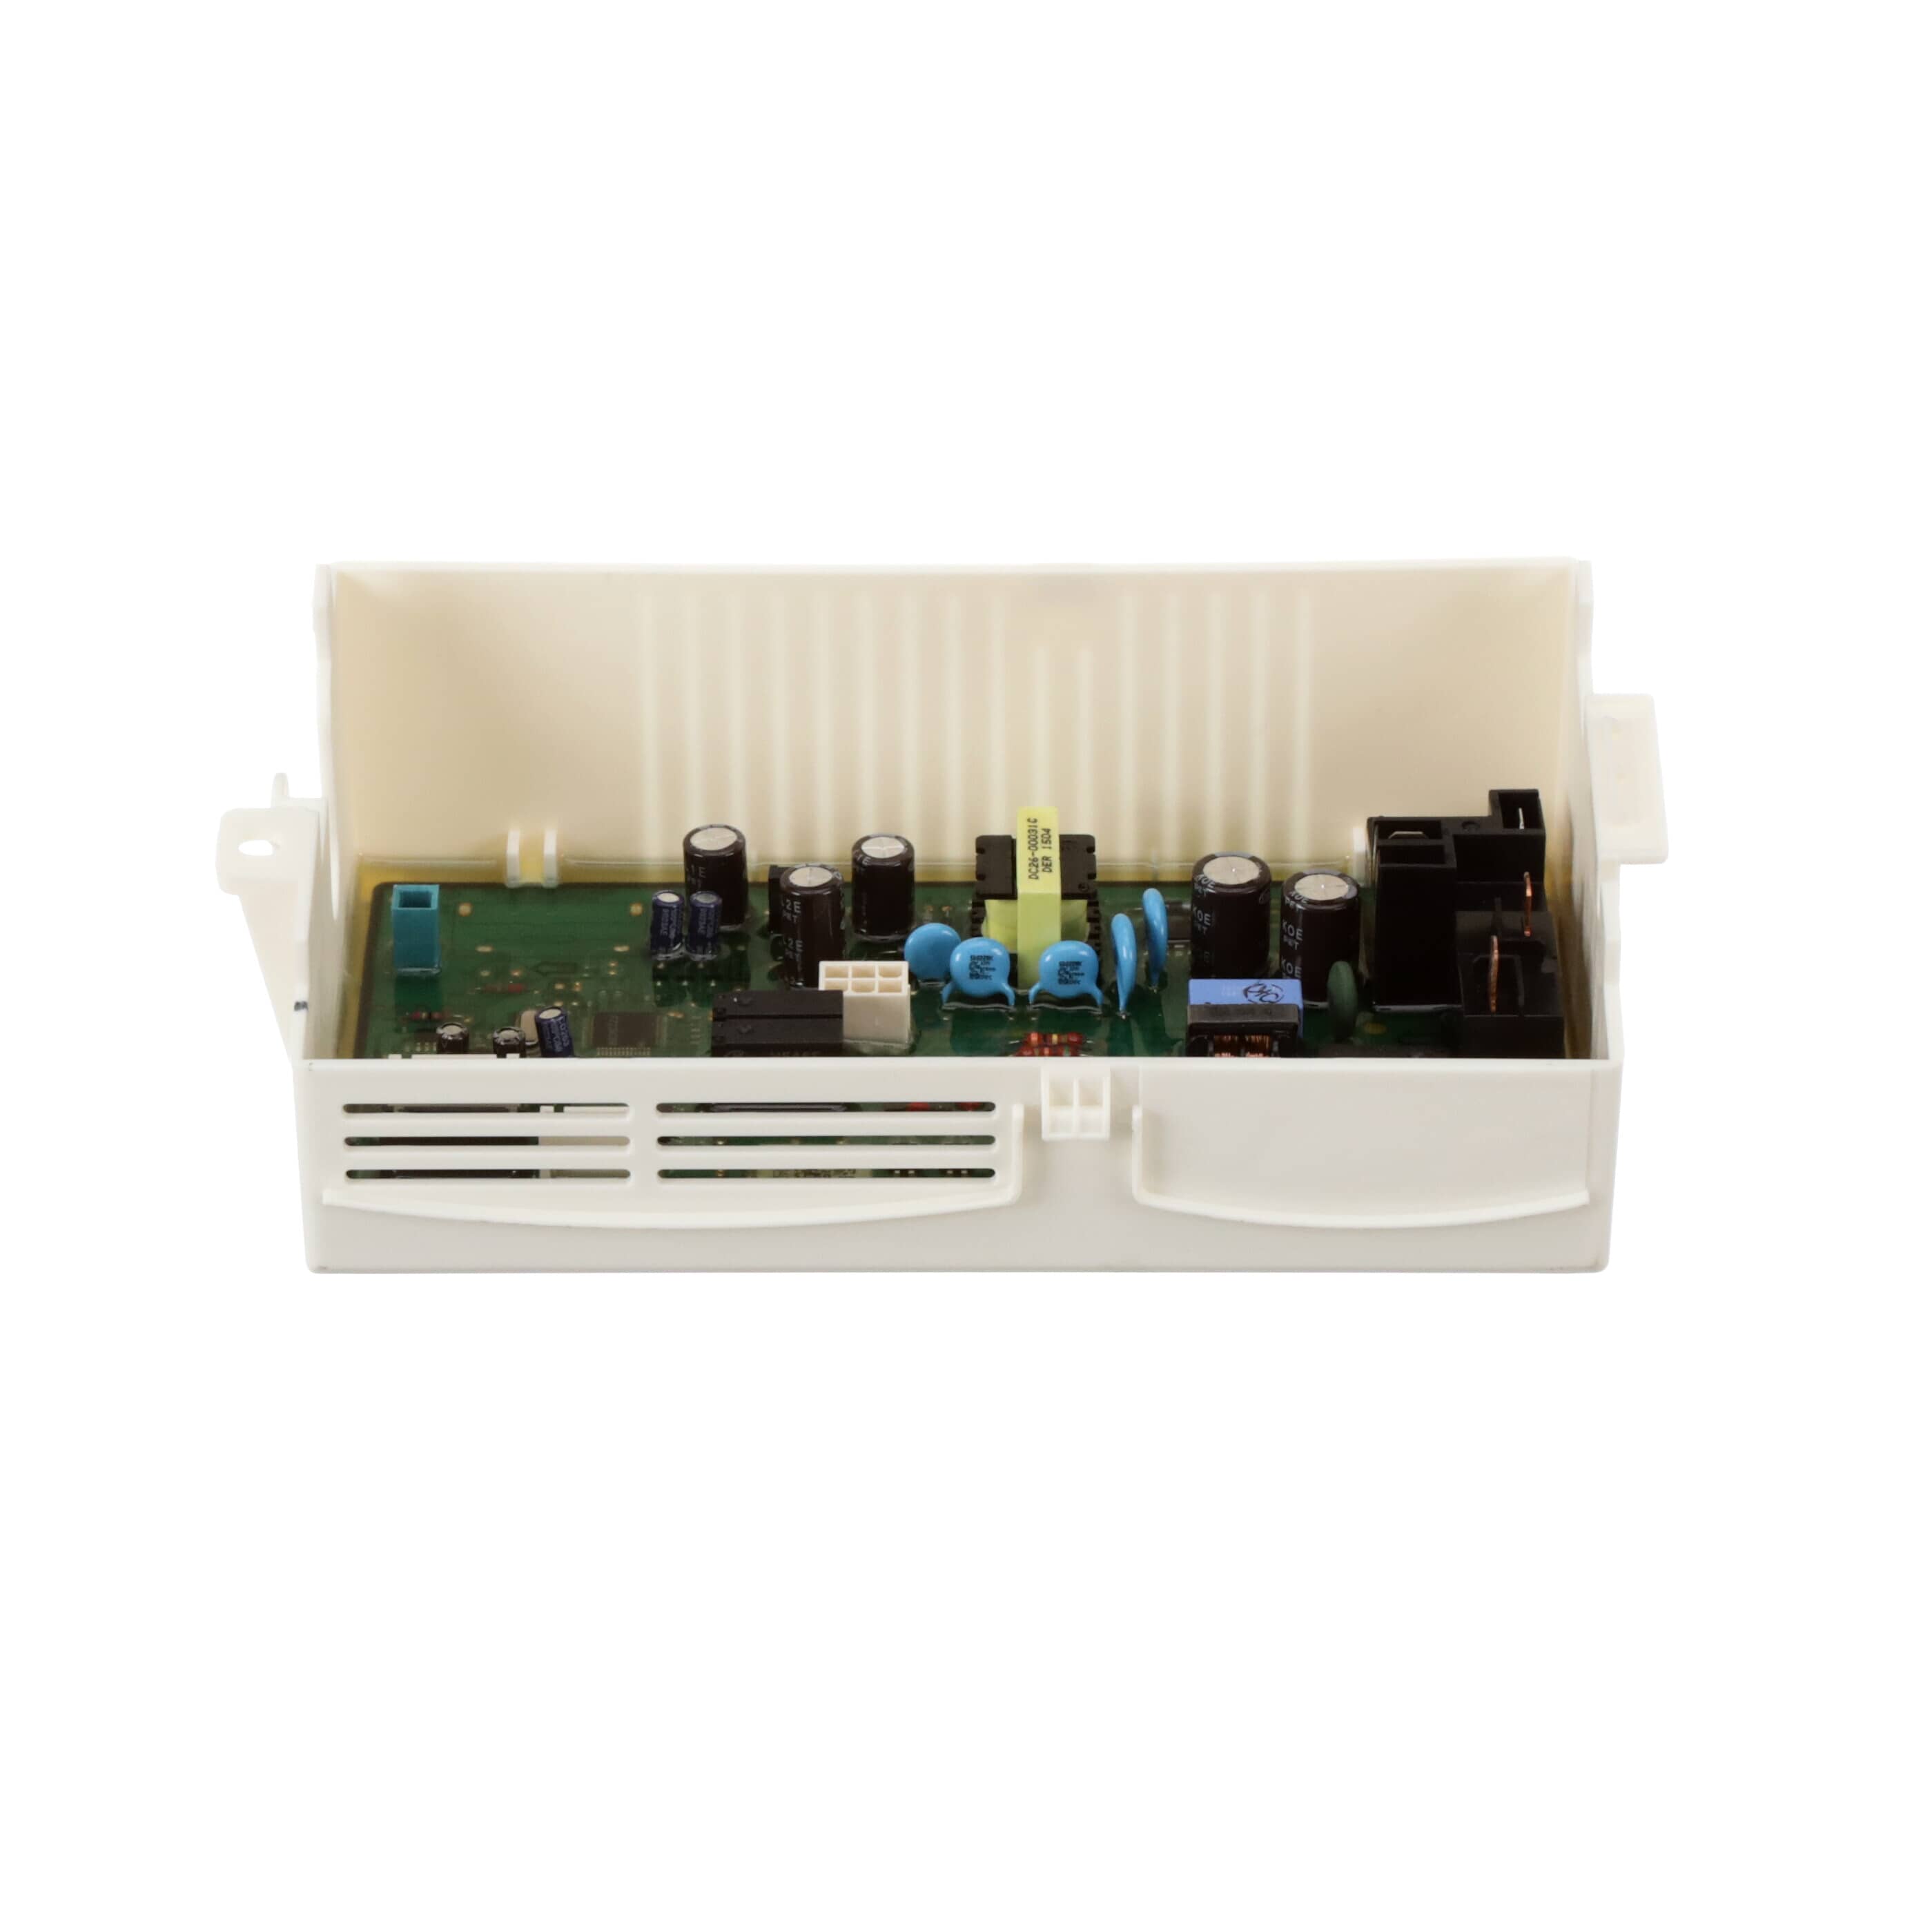 Samsung DC92-01310A Dryer Electronic Control Board